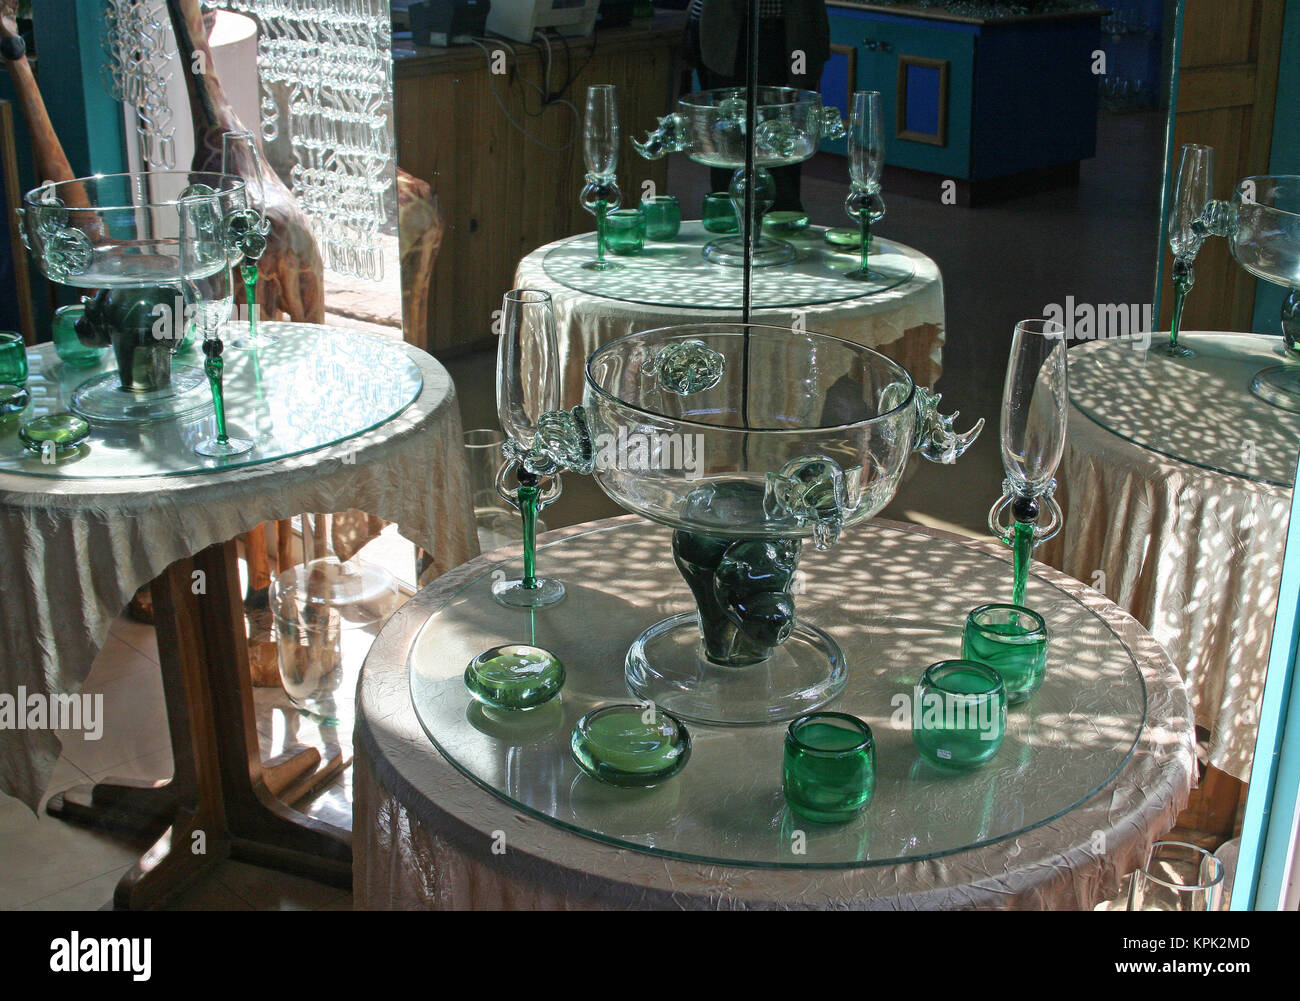 Round tables displays with all sorts of green glasses handmade from recycled glass for sale, Kingdom of Swaziland. Stock Photo